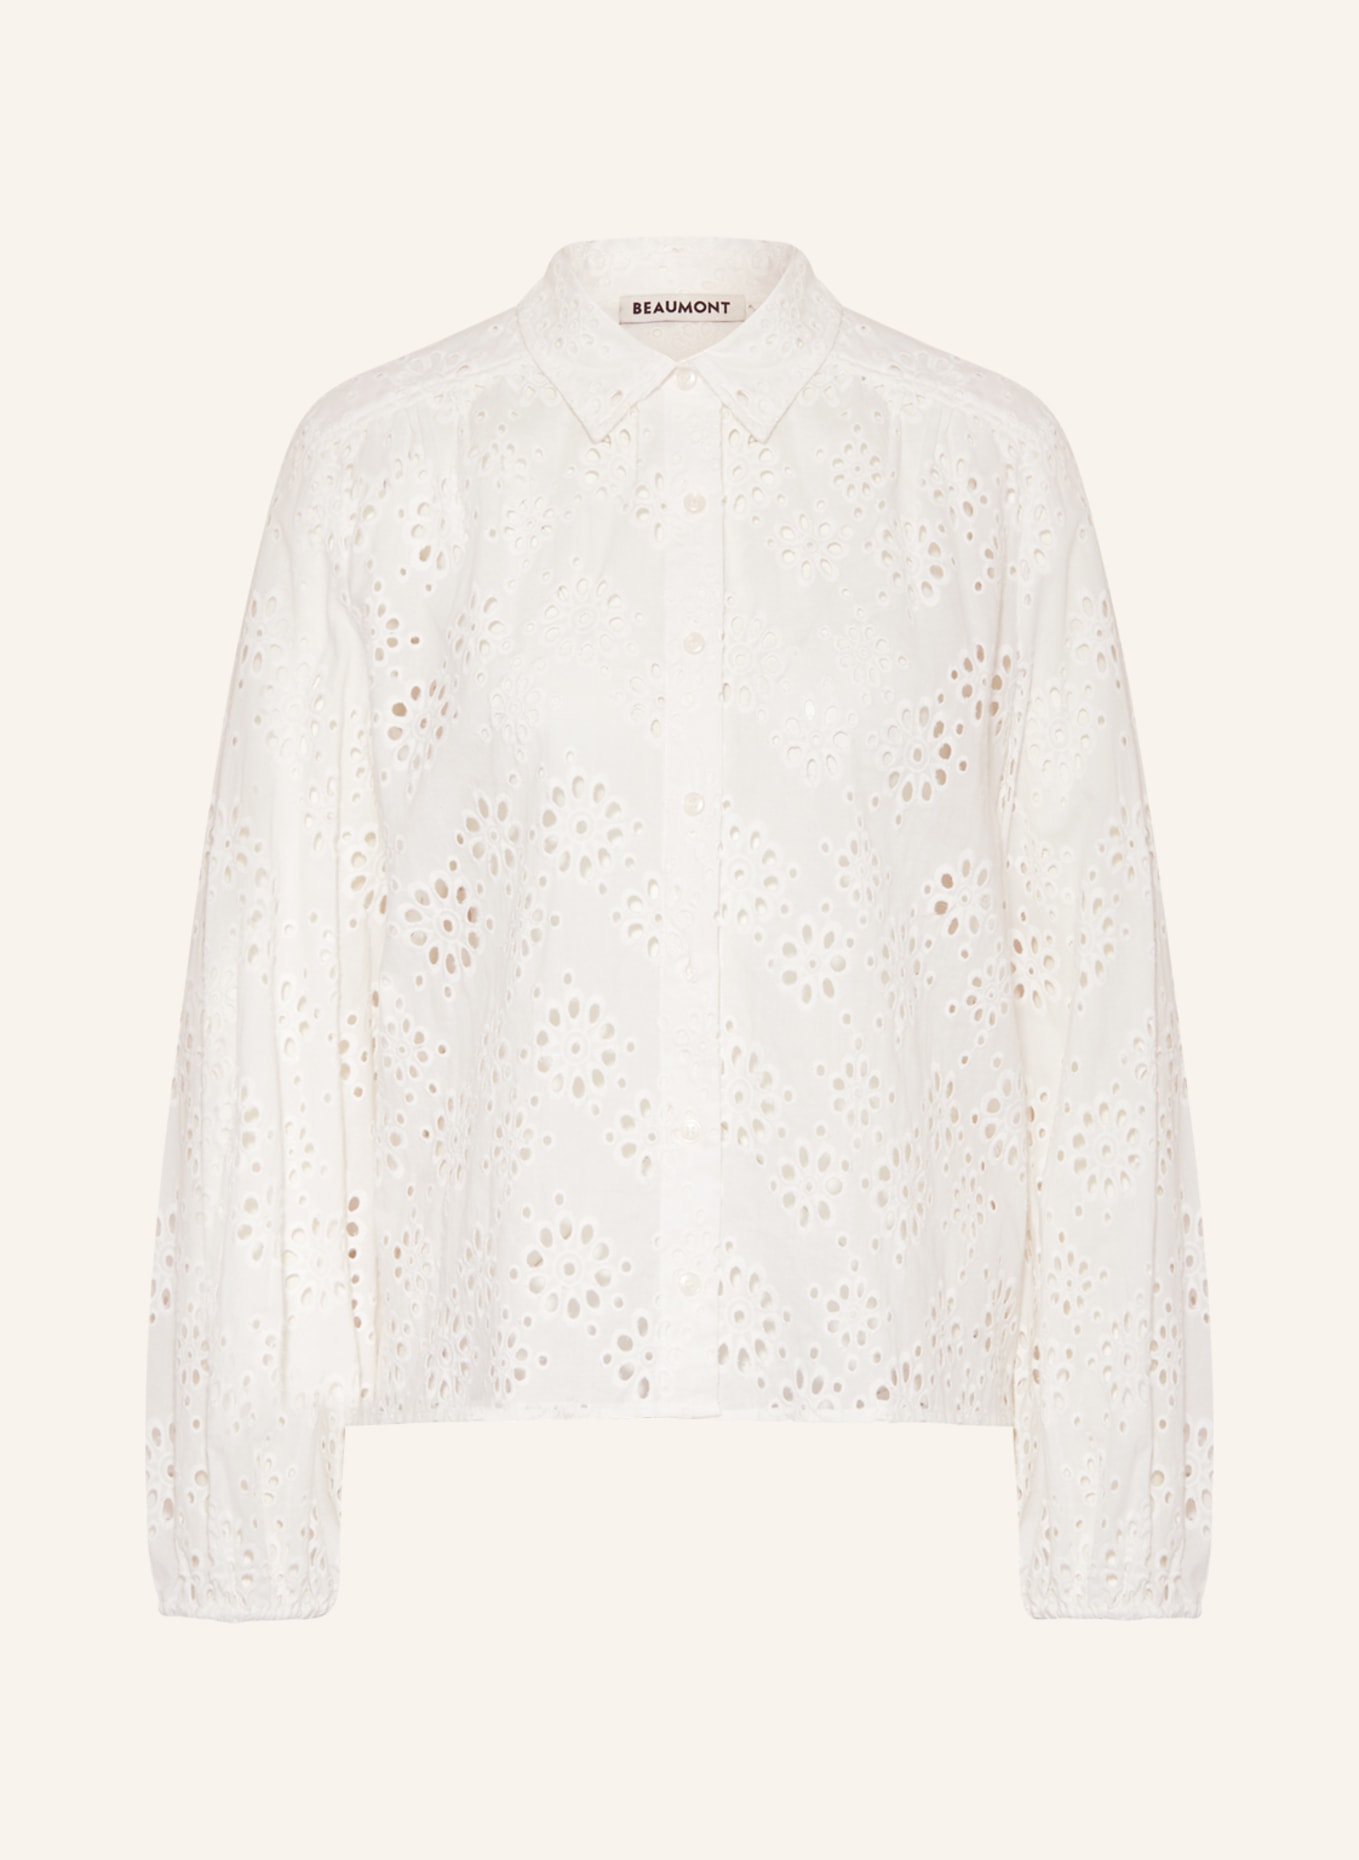 BEAUMONT Shirt blouse ALASKA made of broderie anglaise, Color: WHITE (Image 1)